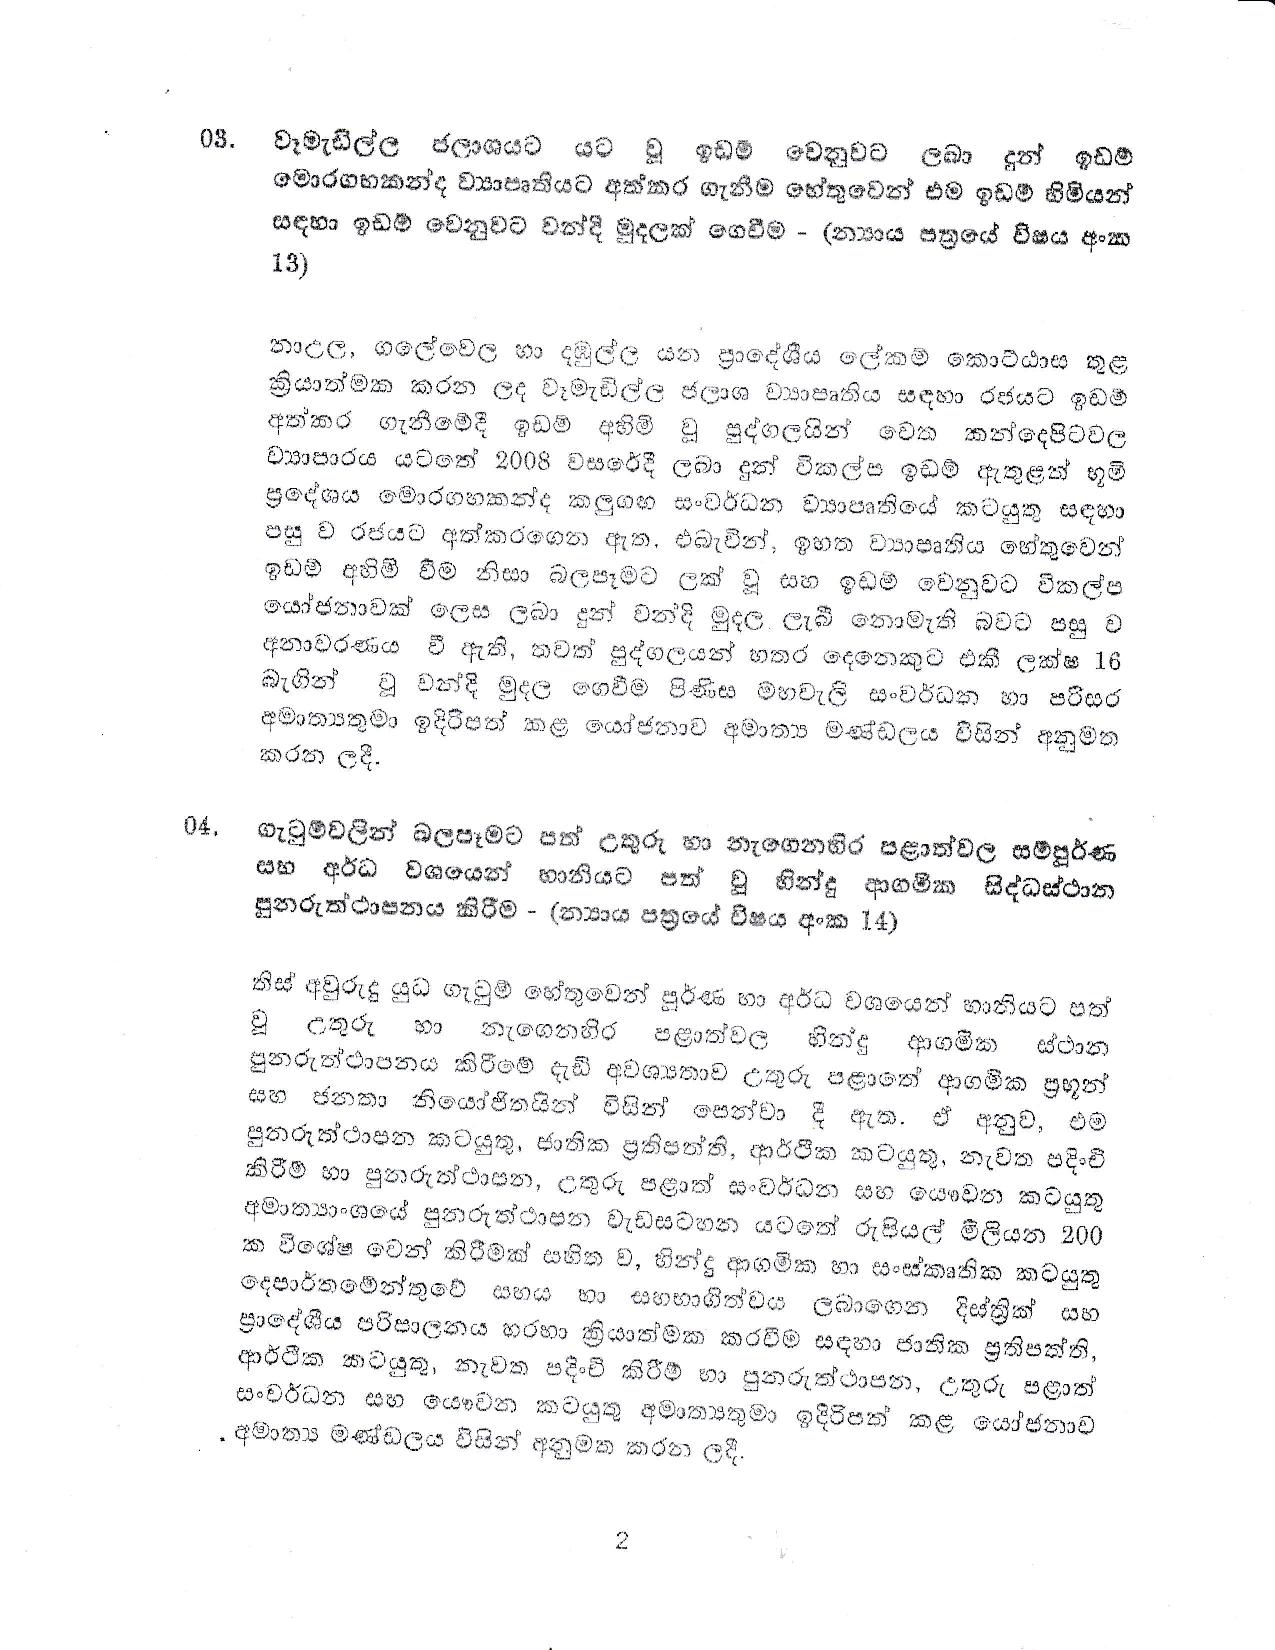 Cabinet Decision 27.08.2019 page 002